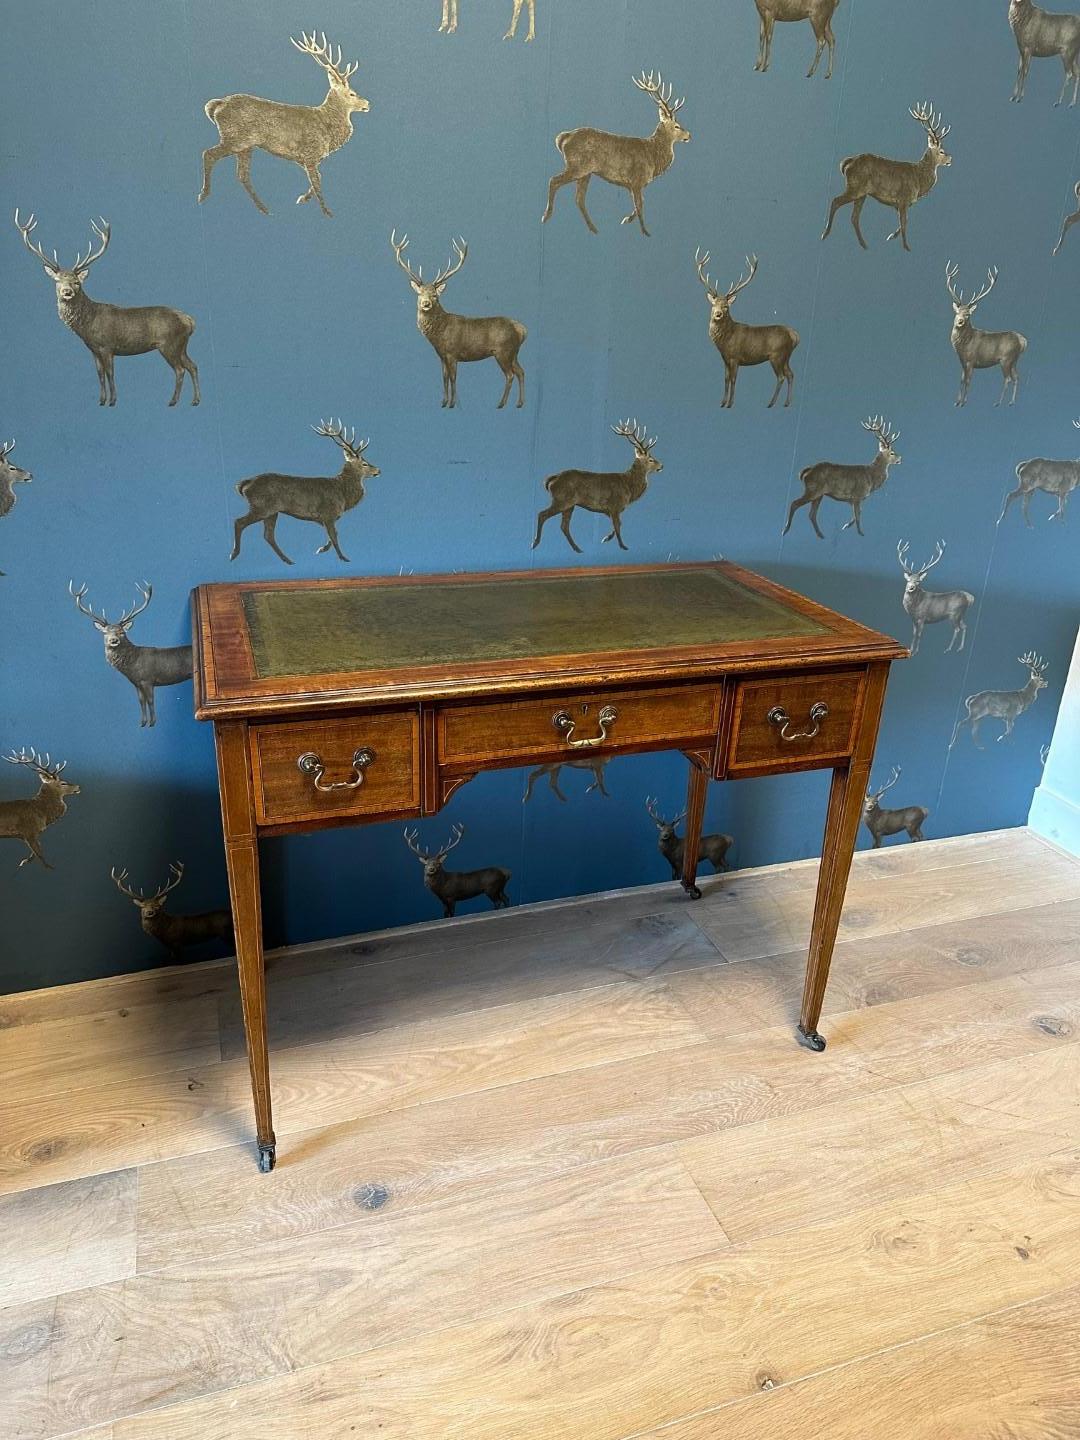 Beautiful small antique mahogany writing table with 3 drawers. The top is inlaid with green gold-edged leather. Writing table has inlay work. This is done with ebony and satinwood. The drawers are also fitted with crossbanded bleached mahogany. The